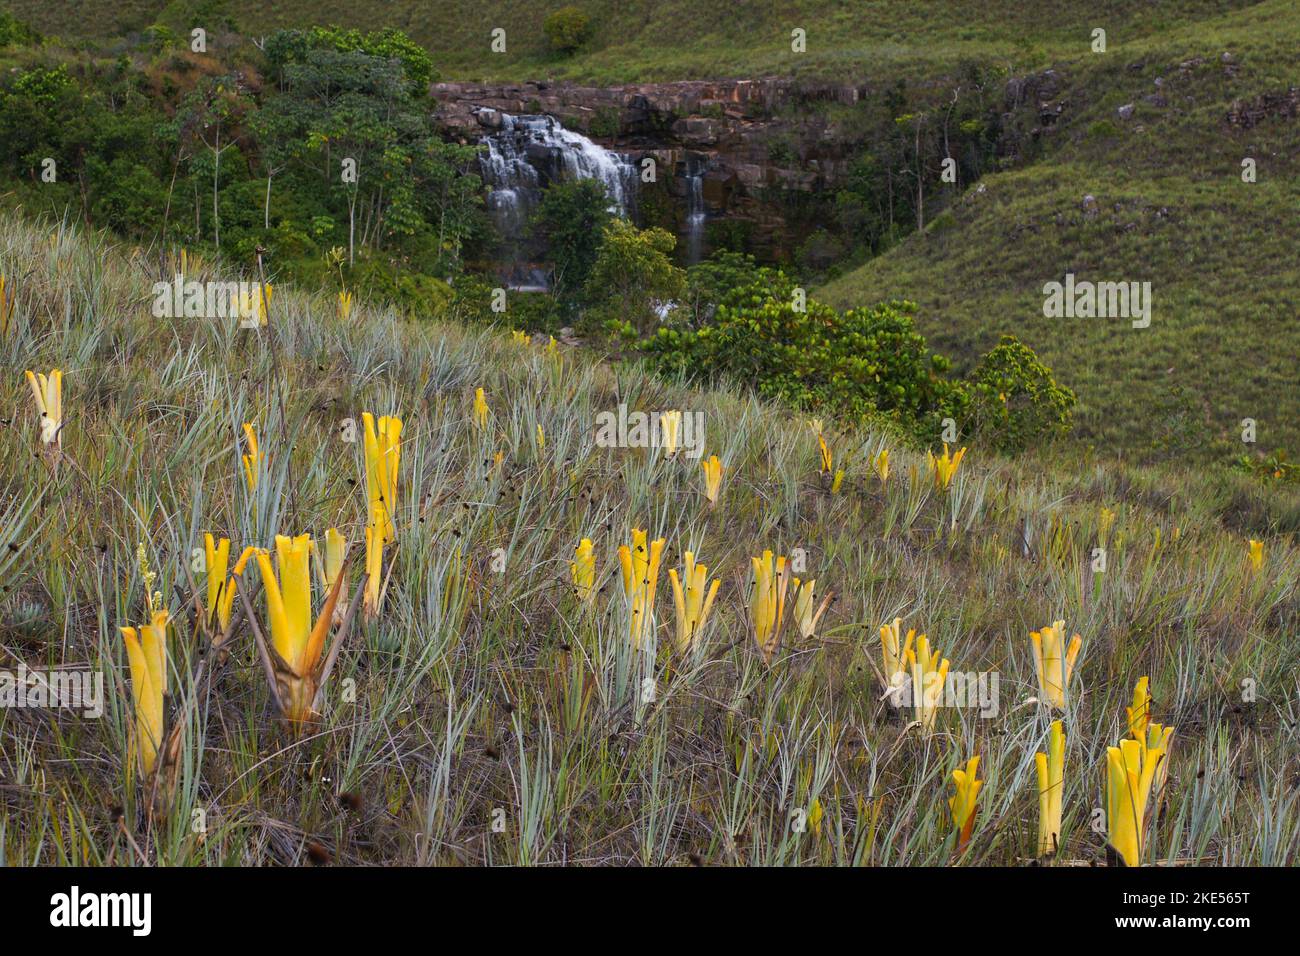 Yellow pitchers of the carnivorous bromeliad Brocchinia reducta in front of a waterfall, Gran Sabana, Venezuela Stock Photo